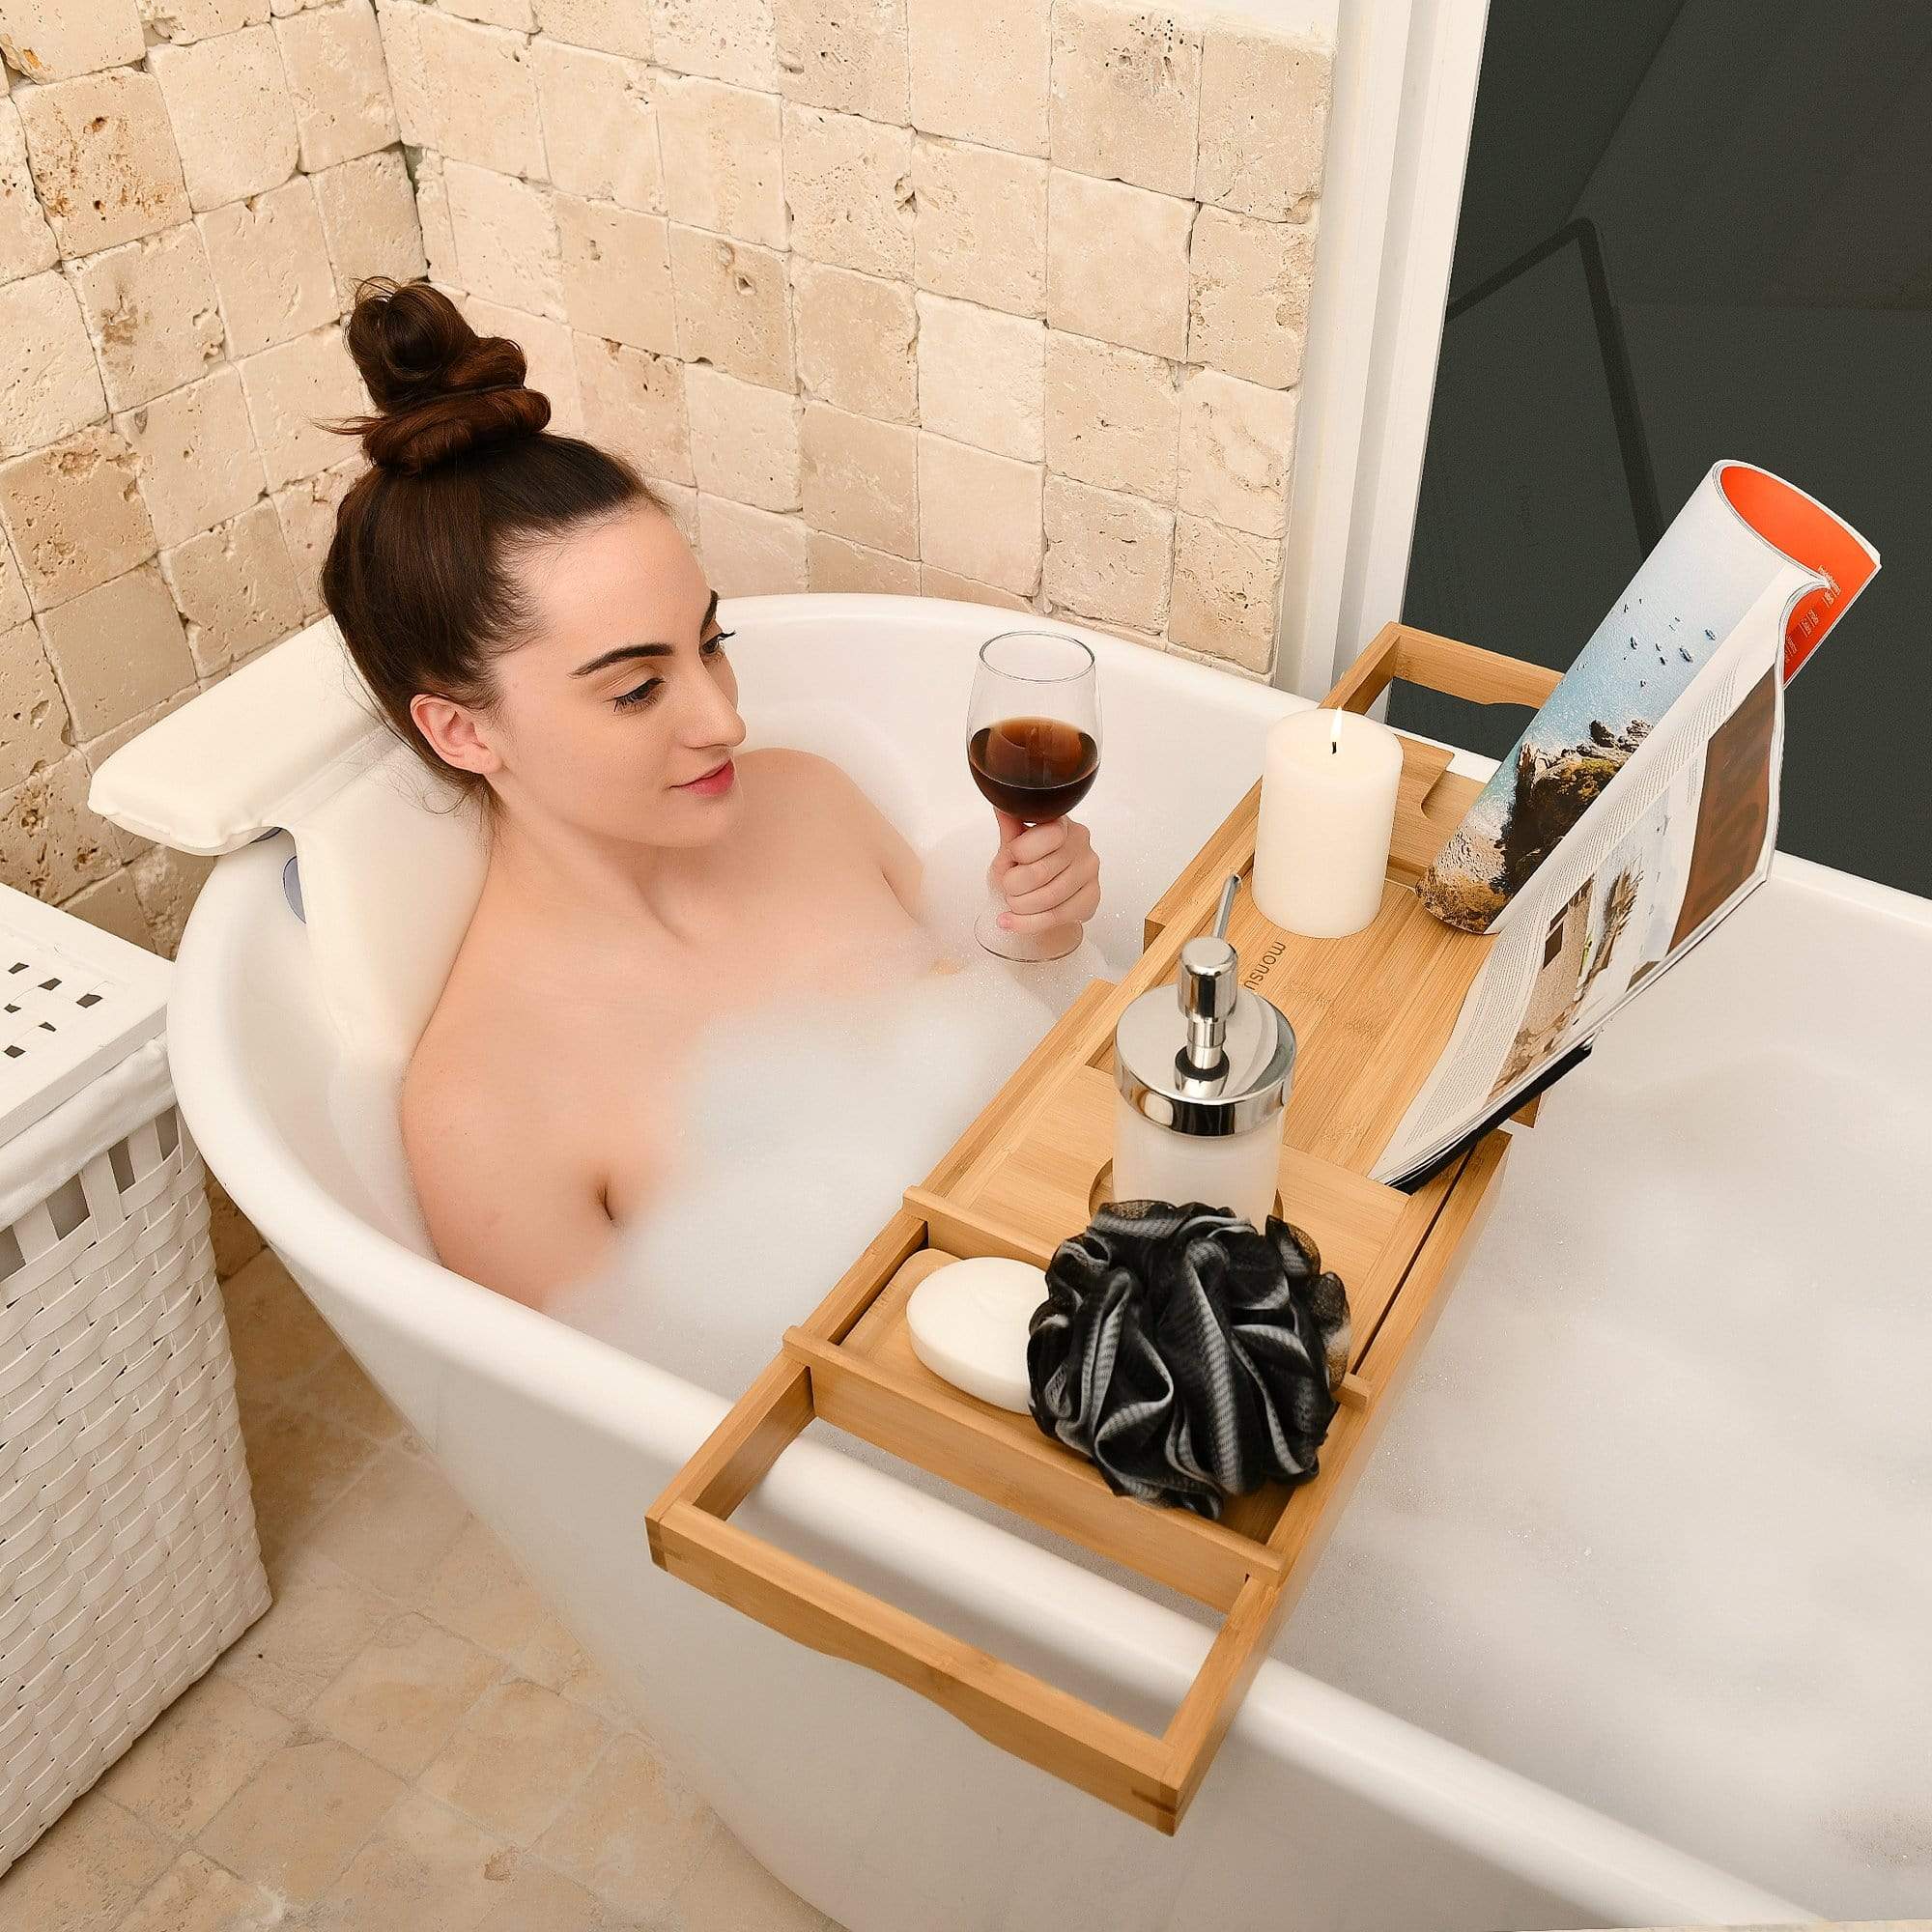 Clawfoot tub caddies enhance your relaxation time